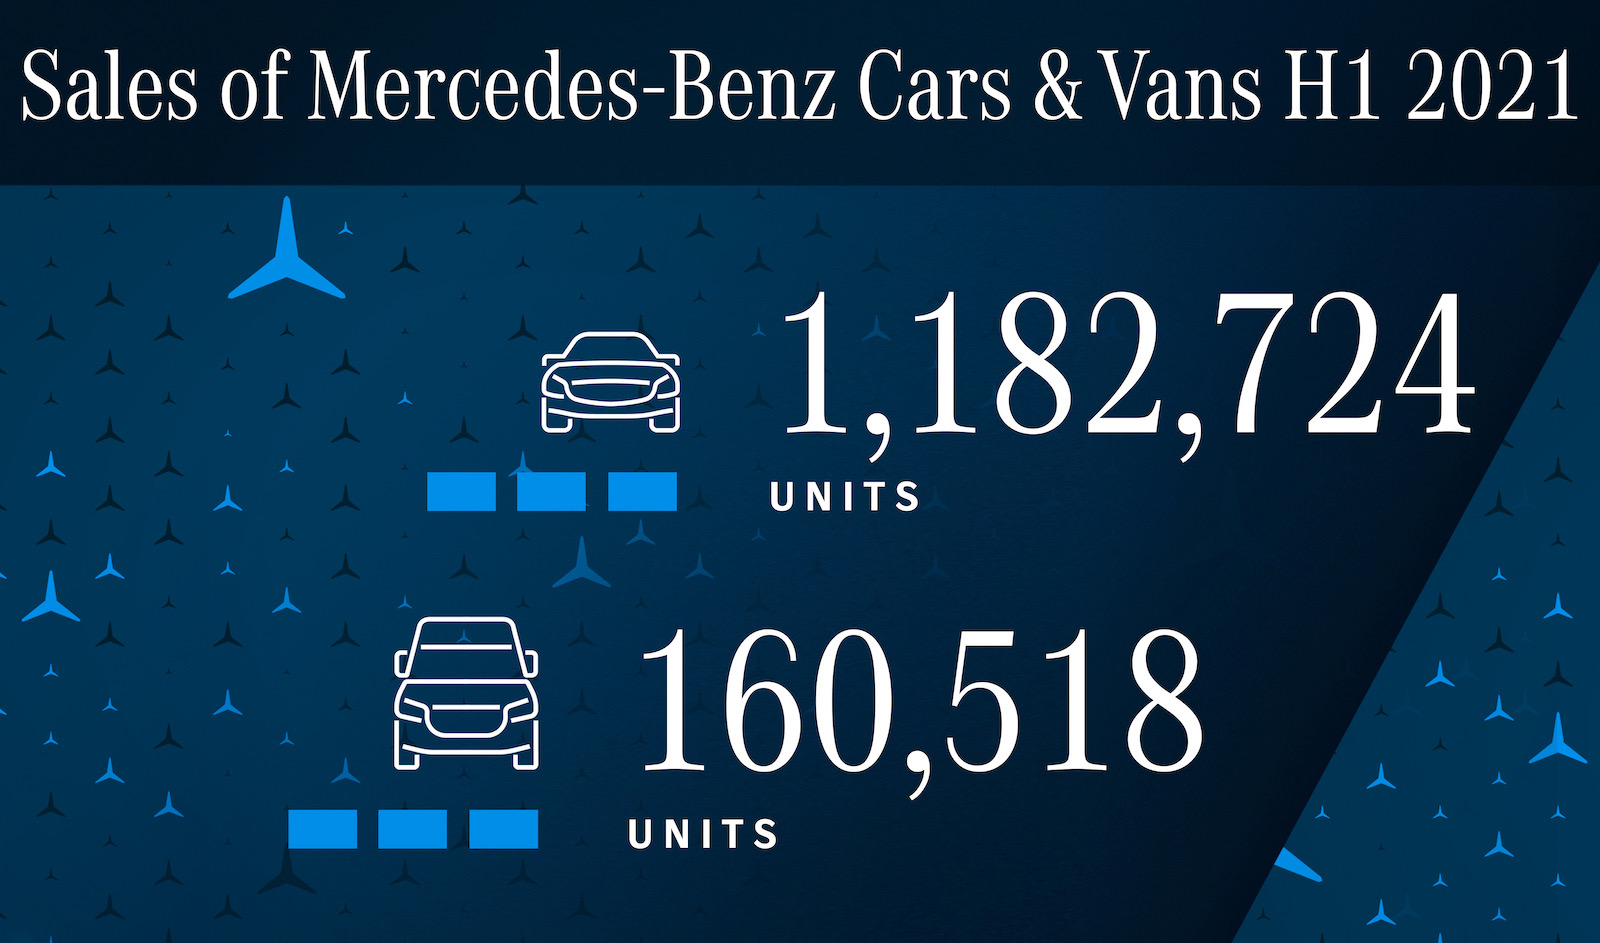 Mercedes-Benz global sales up 25% in 2021 first half